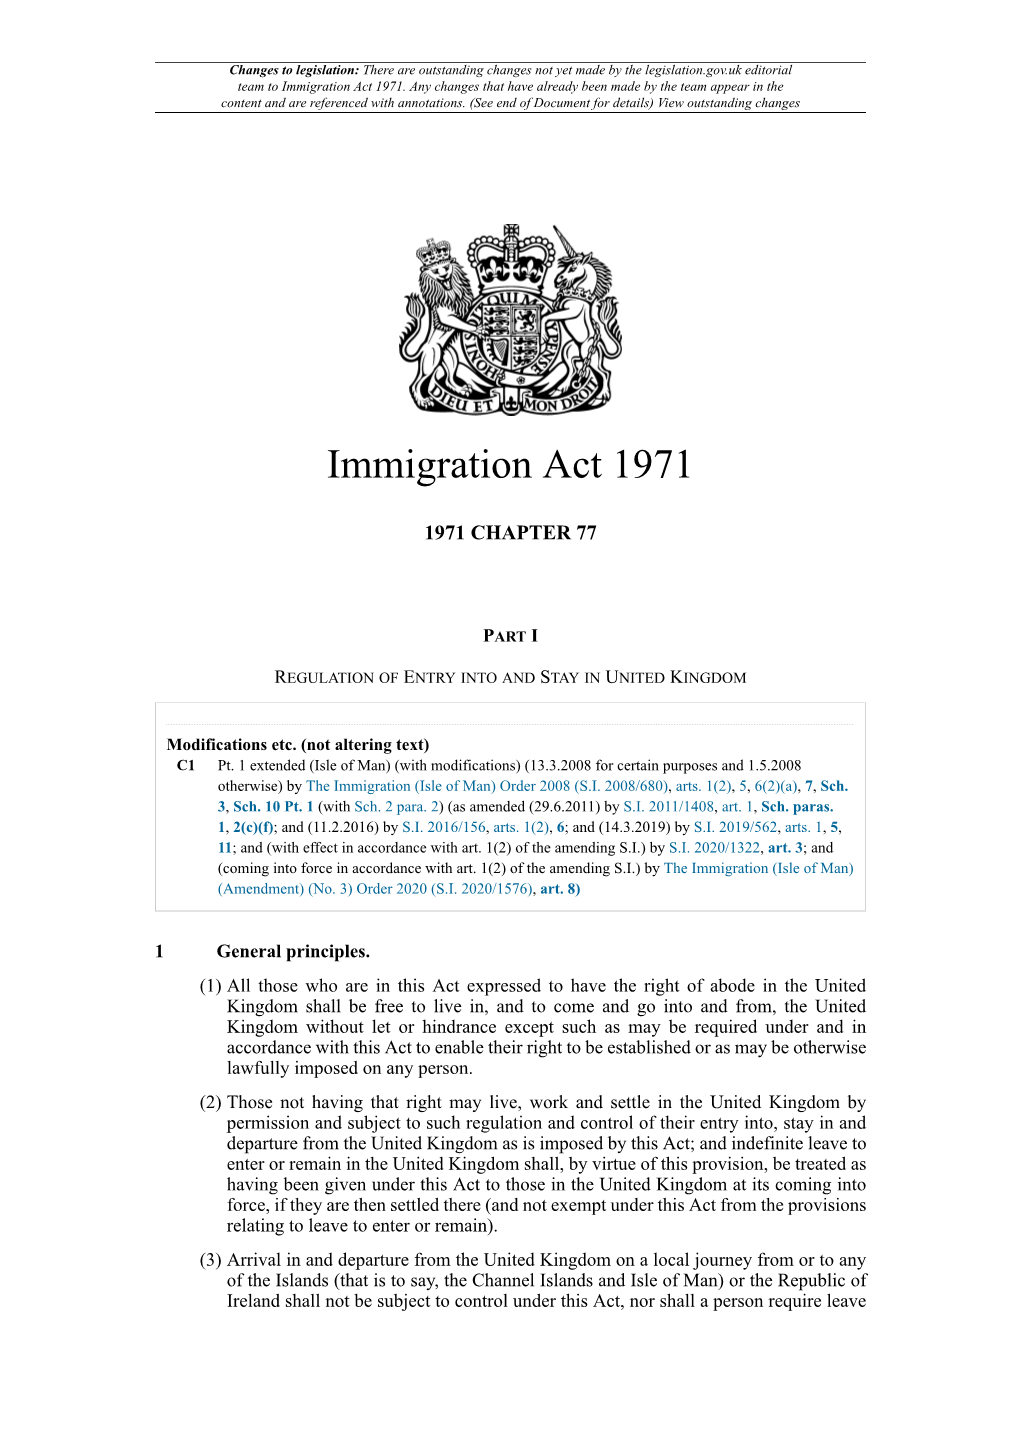 Immigration Act 1971